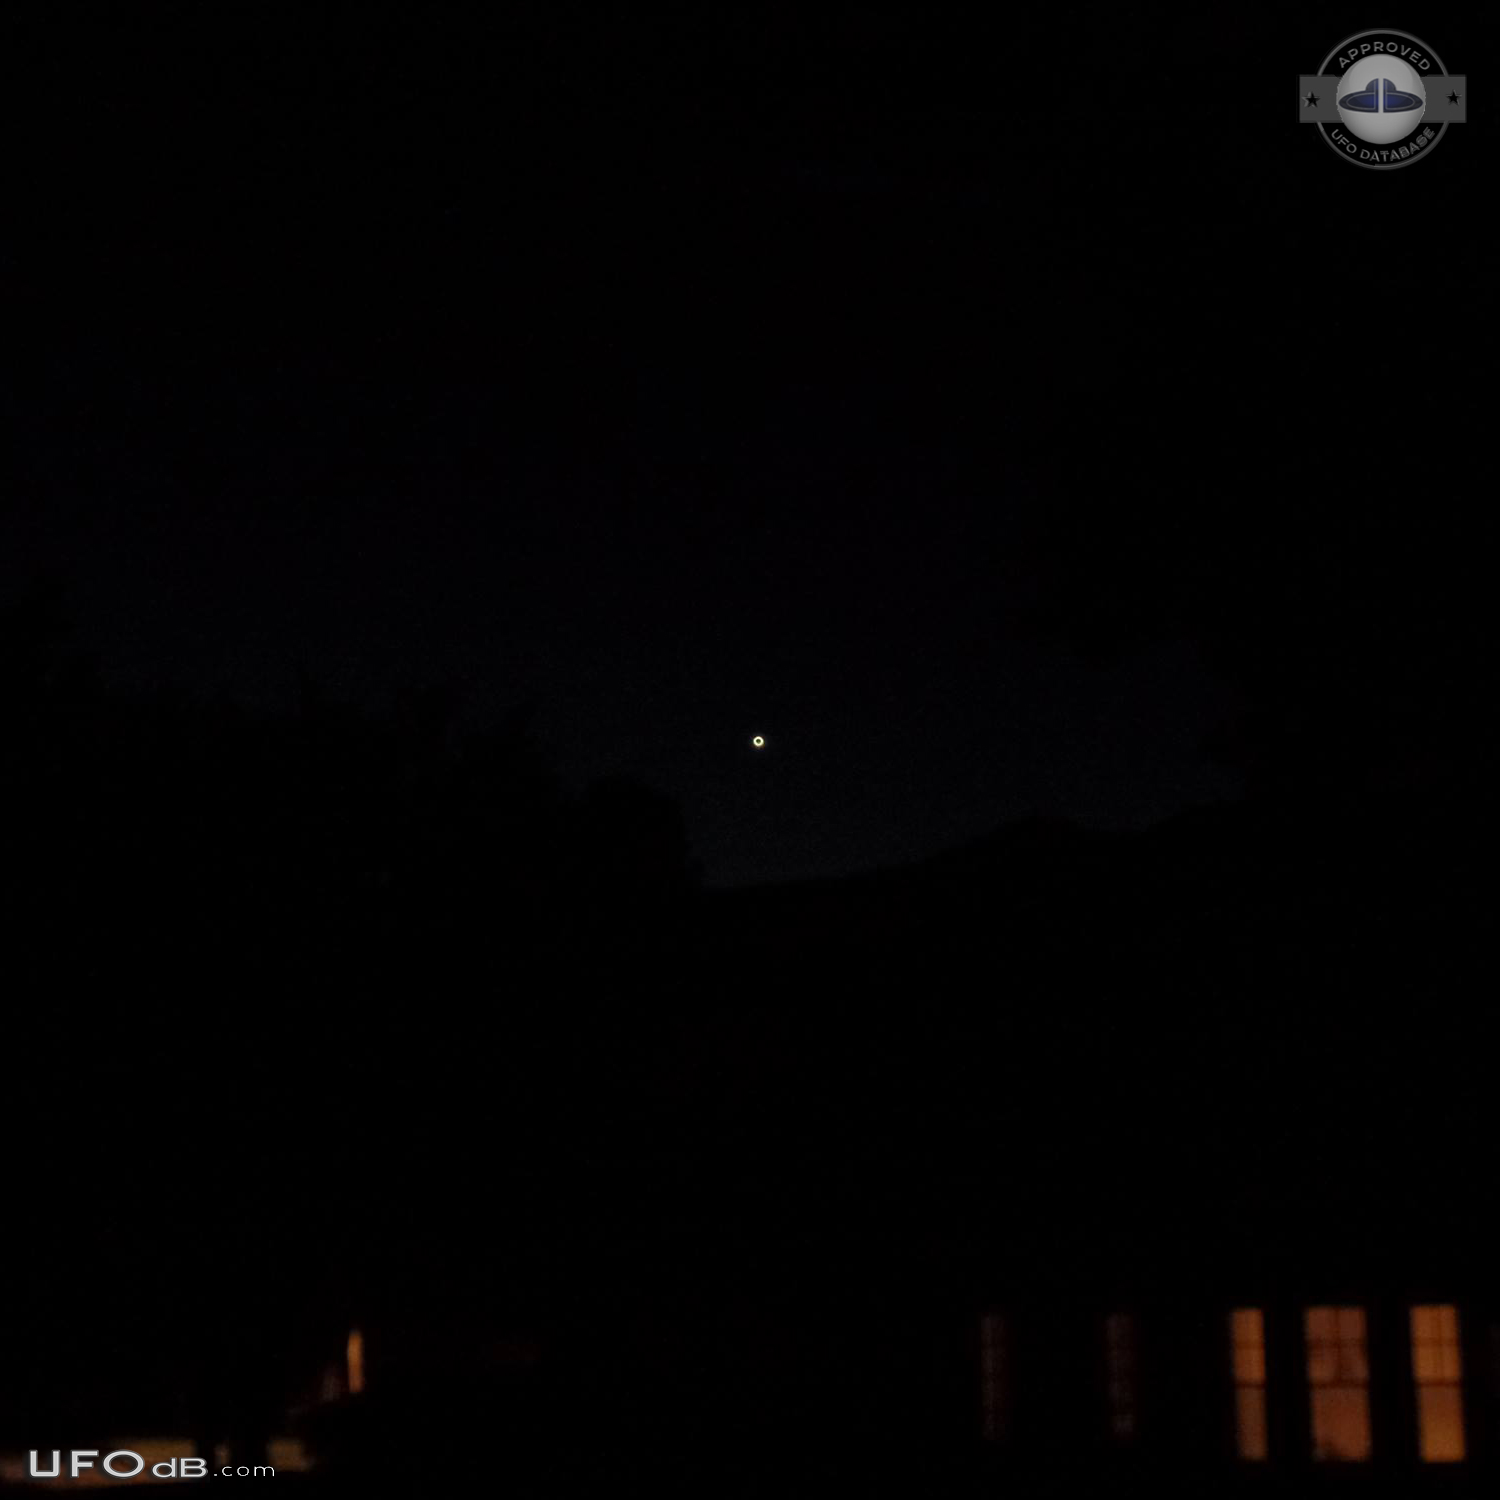 Thought was a star but UFO 10x larger than any other star - Florida UFO Picture #718-1